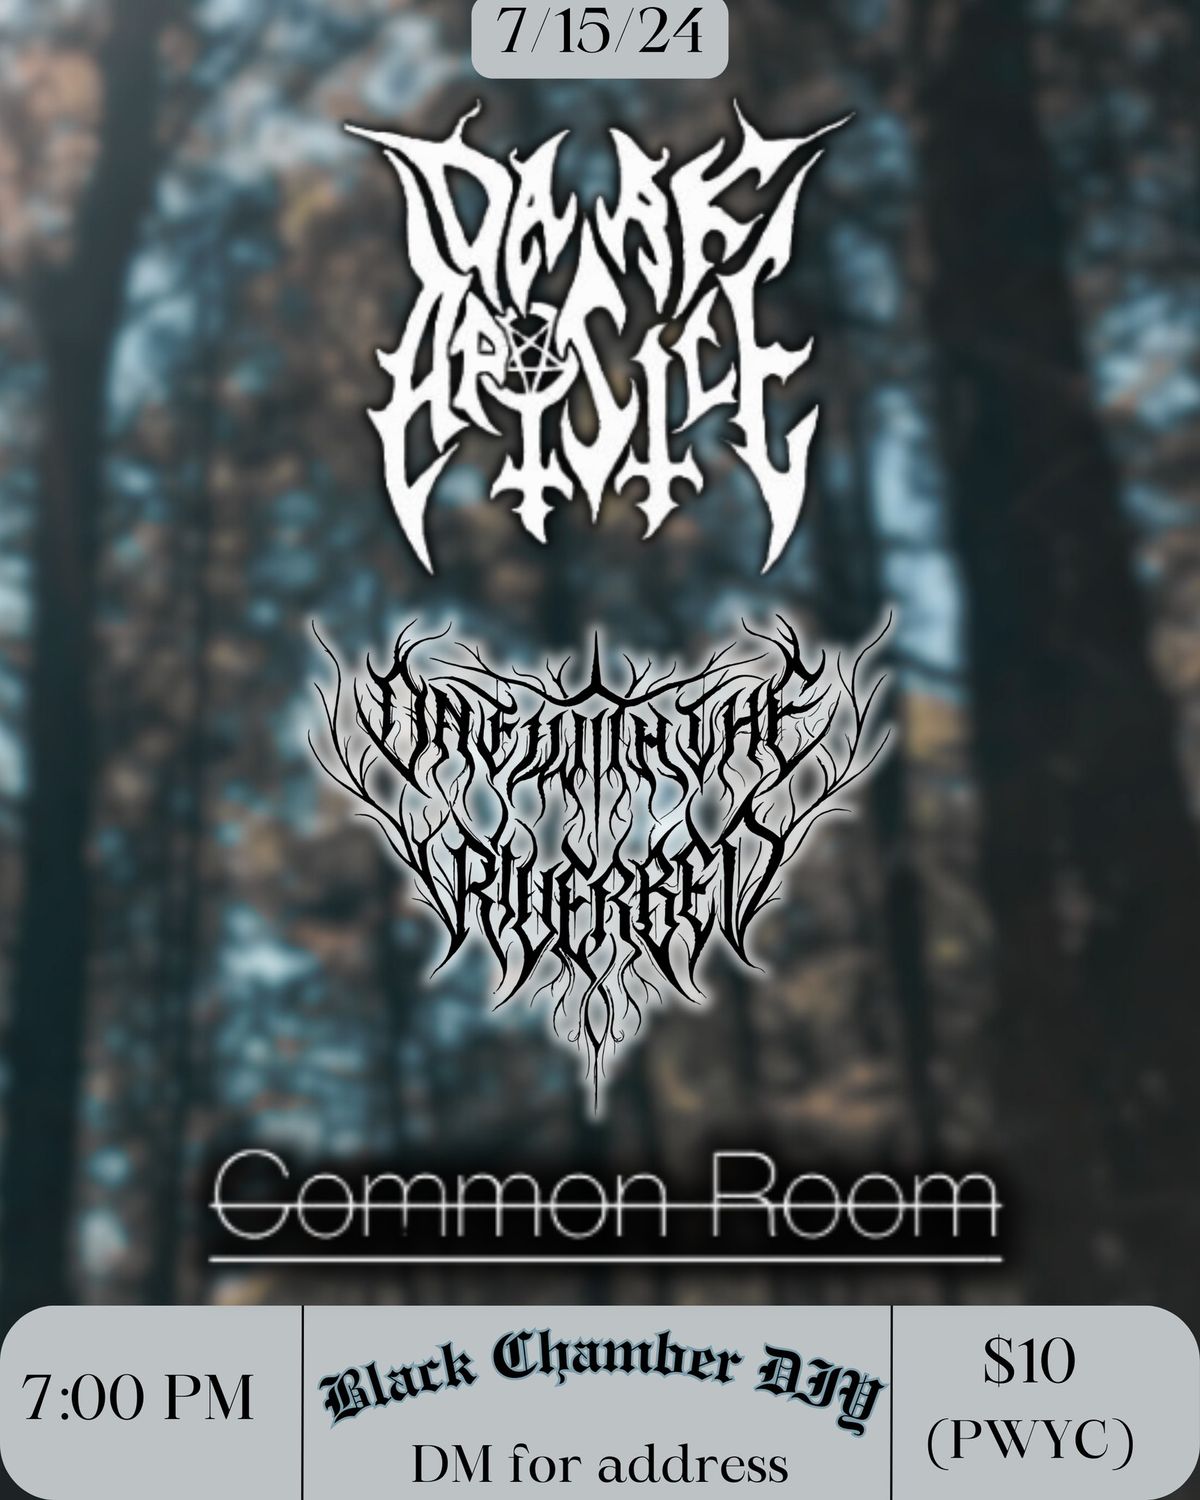 Dark Apostle, One with the Riverbed, and Common Room @ Black Chamber DIY